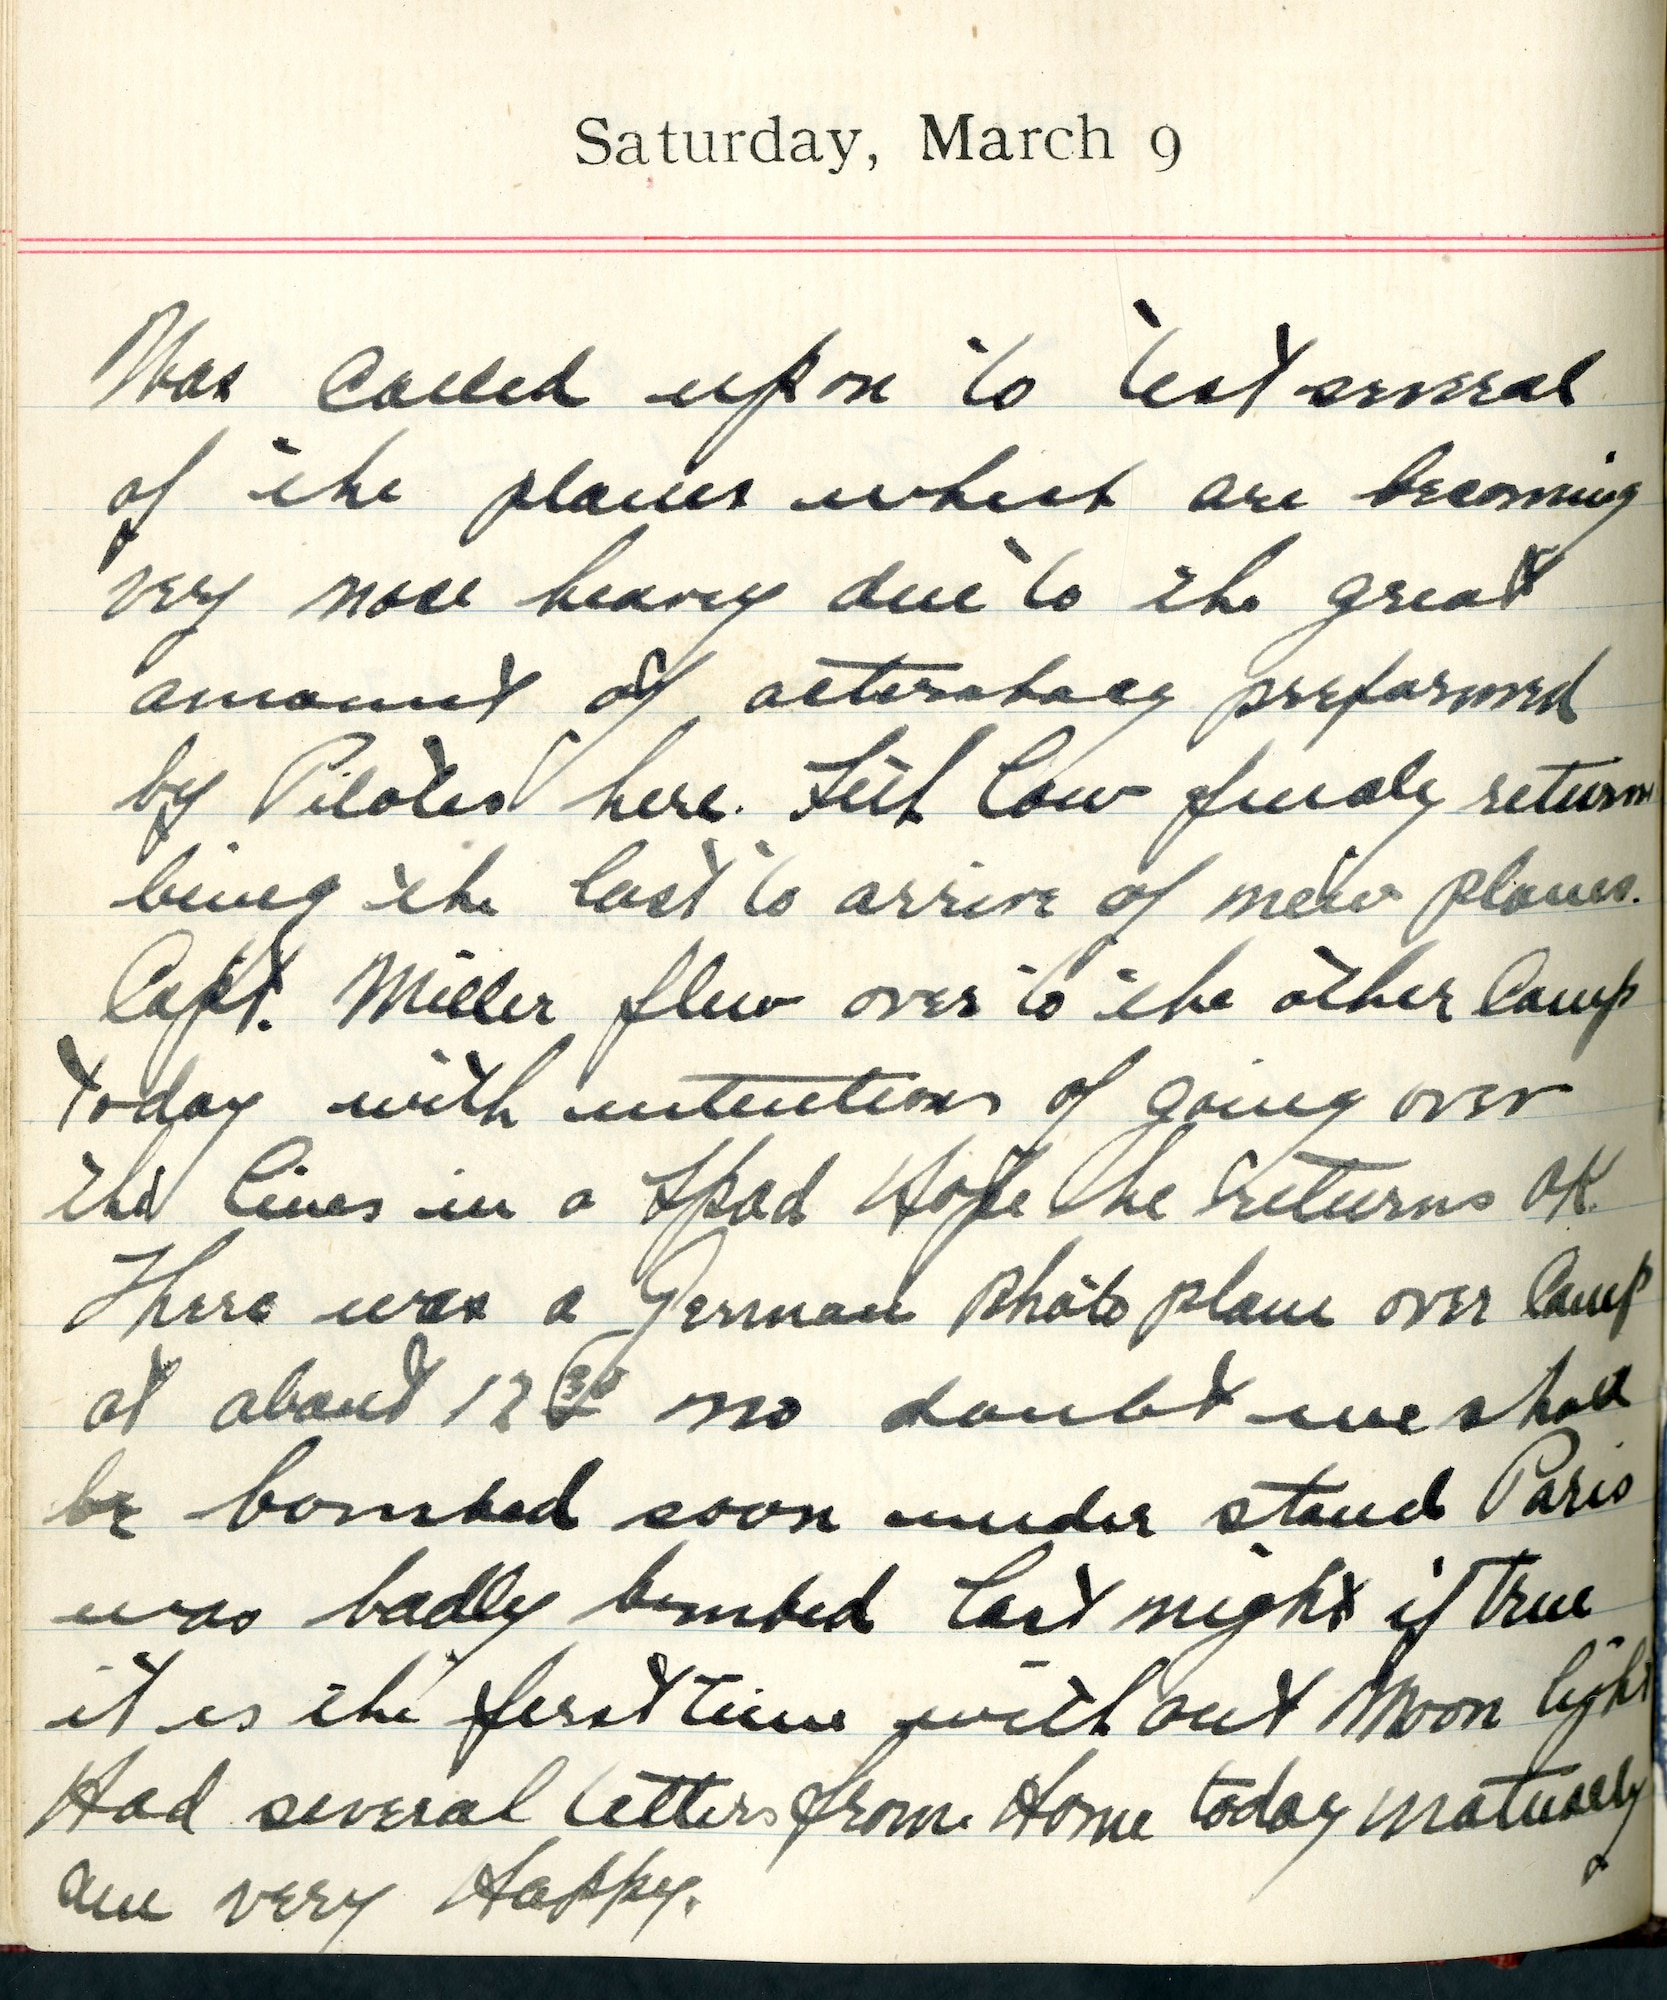 Capt. Edward V. Rickenbacker's 1918 wartime diary entry. (03/09/1918).

Was called upon to test several of the planes which were becoming very nose heavy due to the great amount of acrobacy performed by pilots here.  Seth Low finally returned being the last to arrive of new planes.  Capt. [James Ely] Miller flew over to the other camp today with intention of going over the lines in a SPAD.  Hope he returns OK.  There was a German photo plane over camp about 1230.  No doubt we shall be bombed soon.  Understand Paris was badly bombed last night.  If true, it was the first time without moon light.  Had several letters from home today.  Naturally, am very happy.